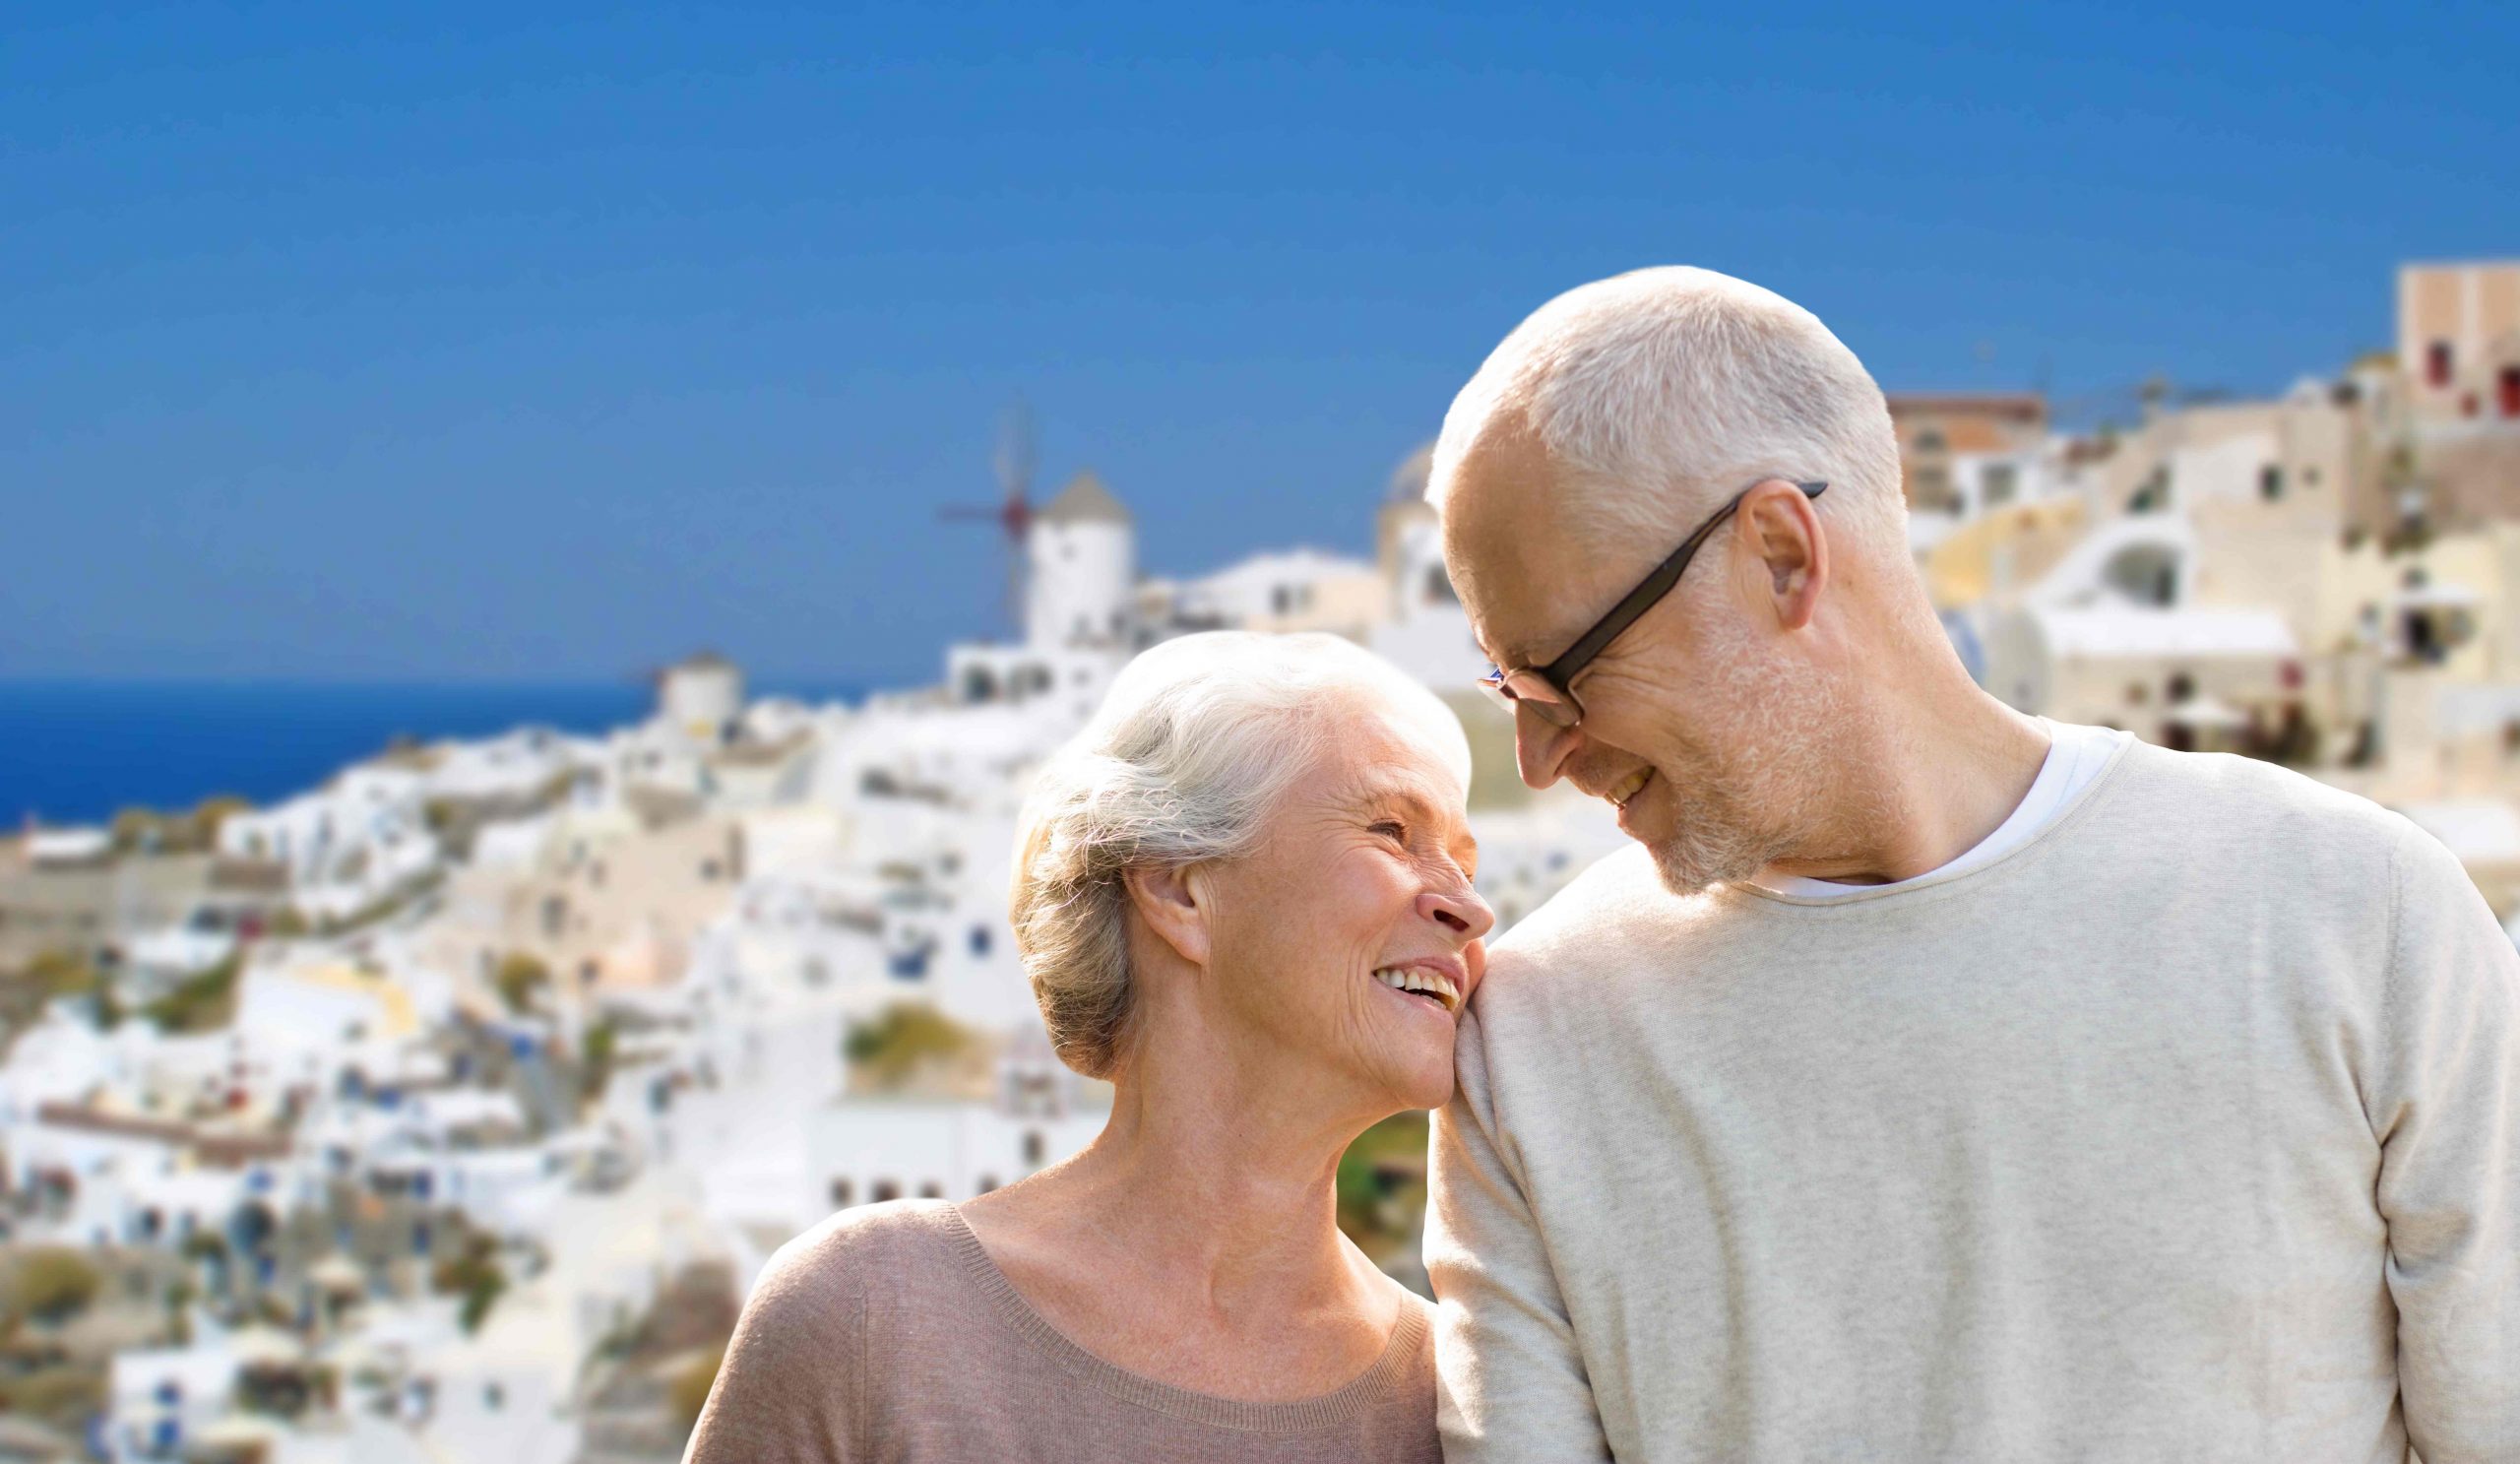 Le Figaro: French Retirees Choosing Greece for Tax Benefits